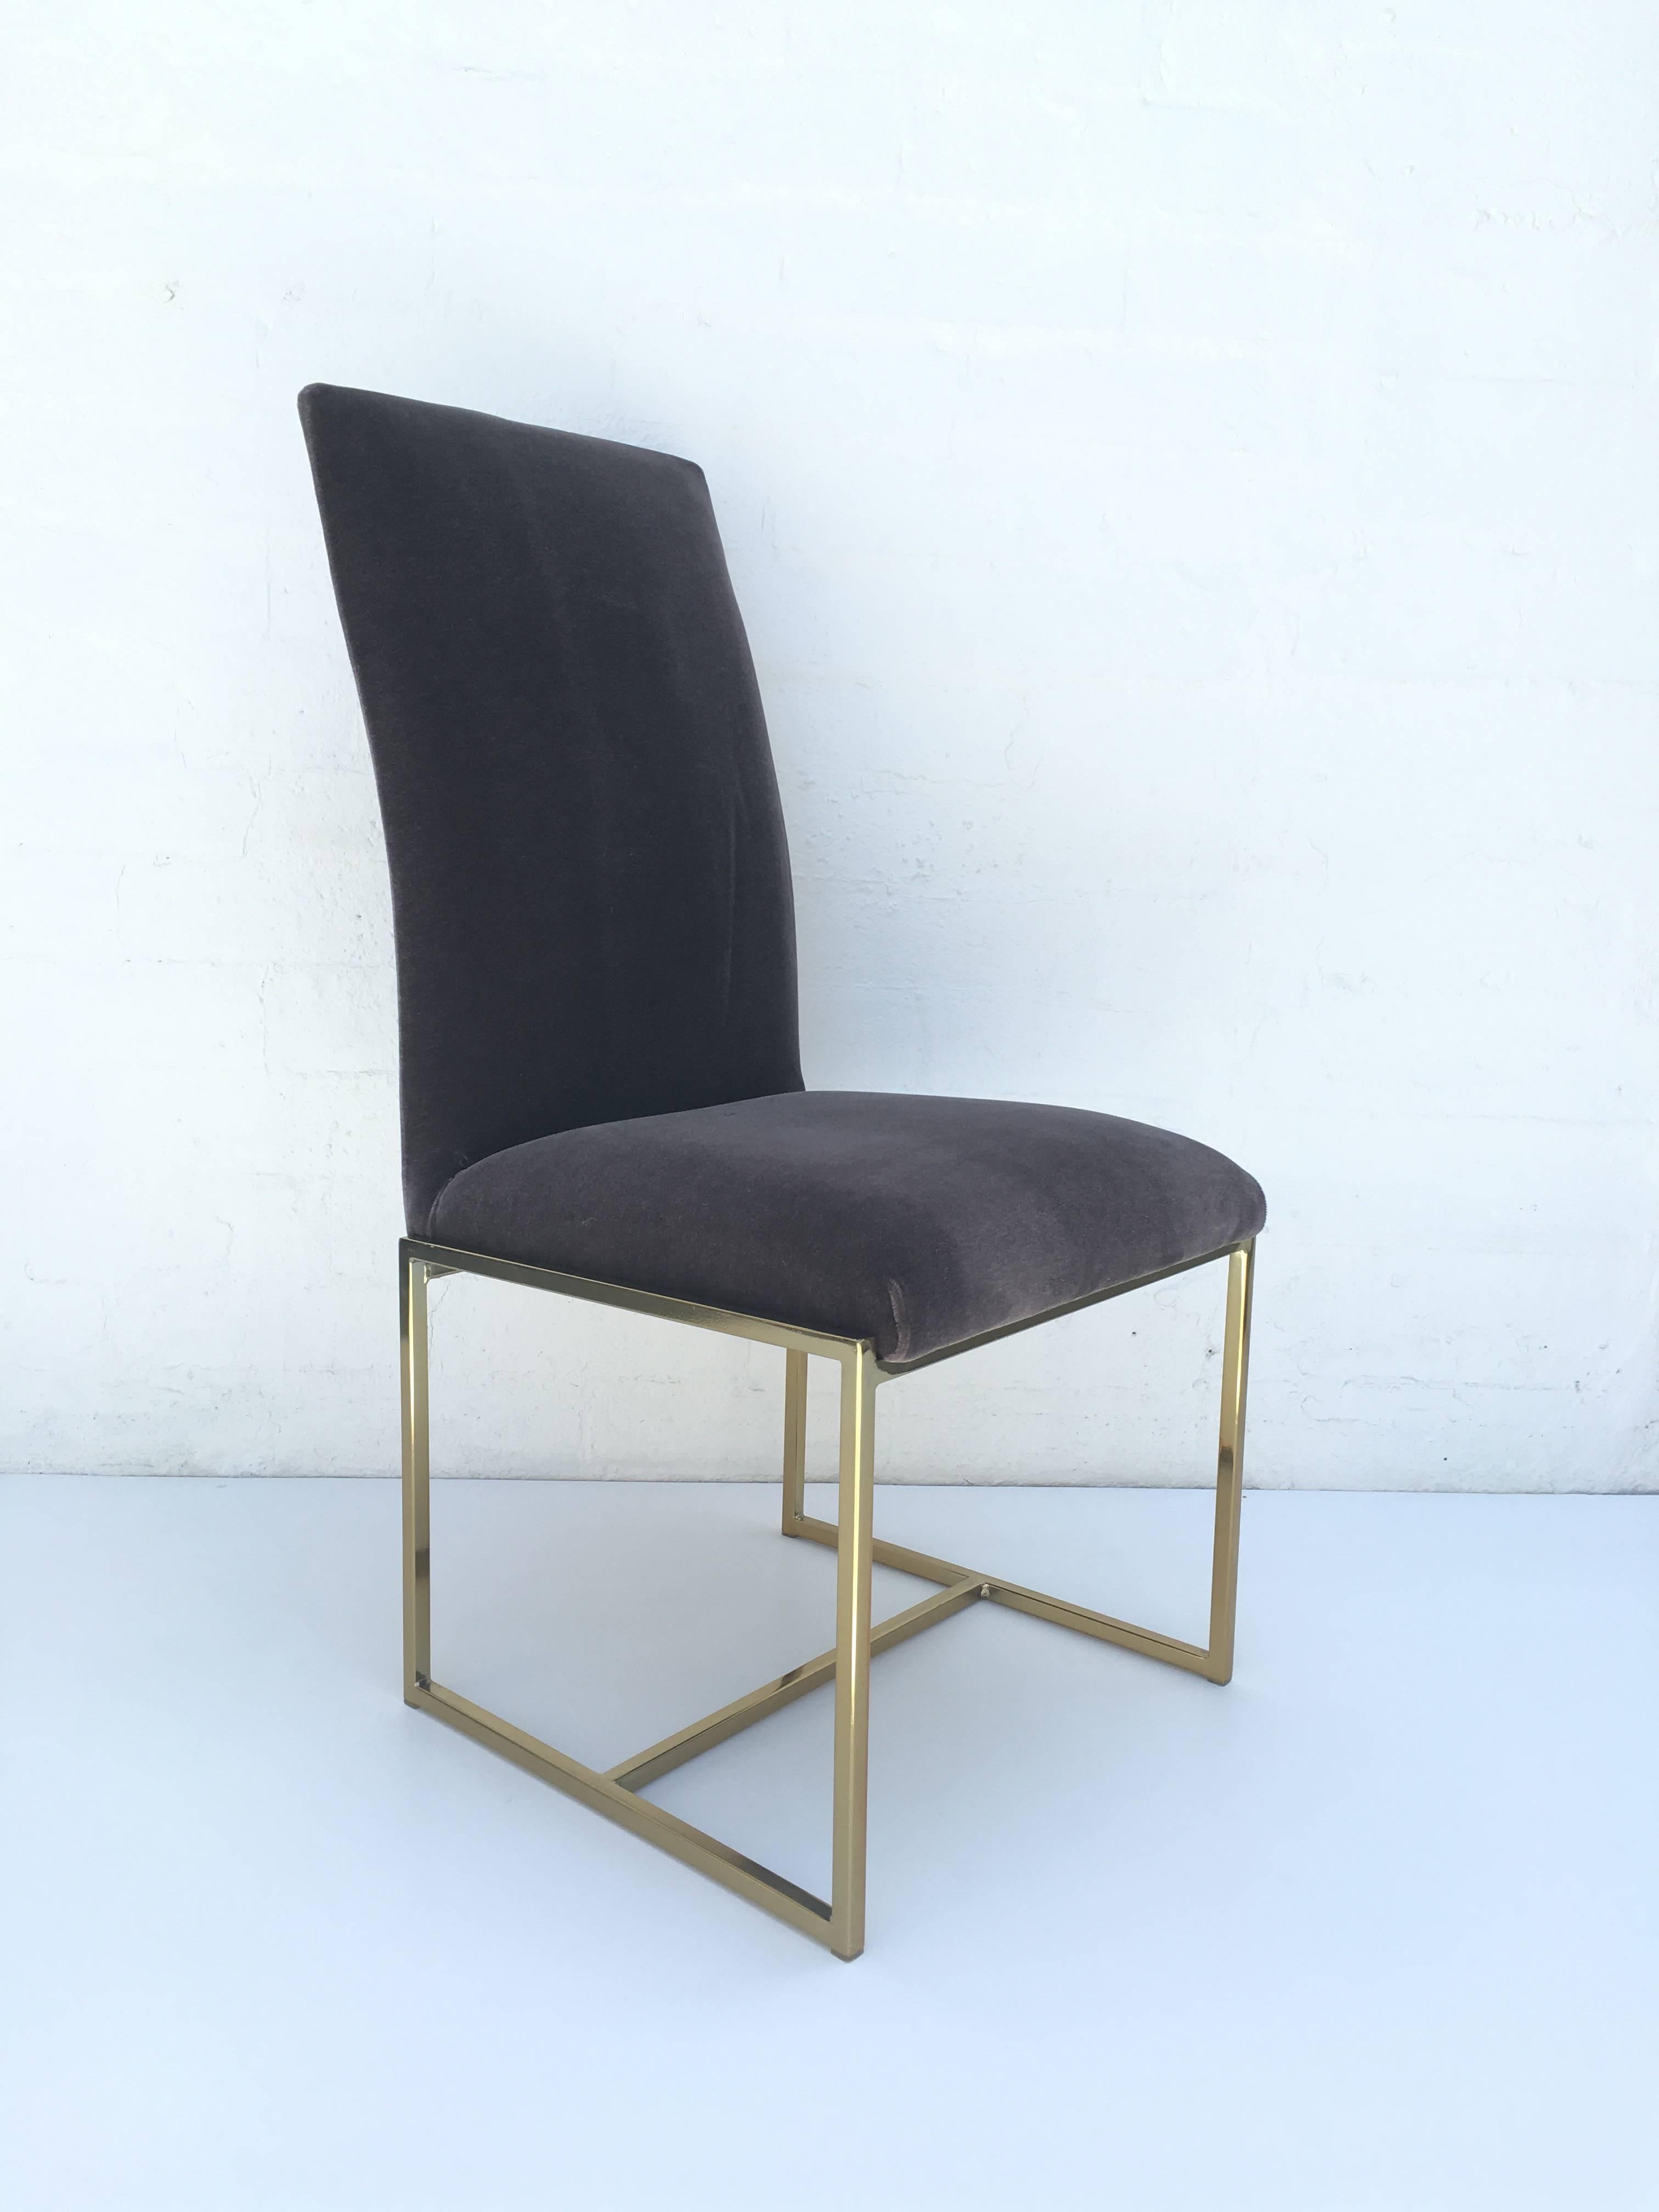 Set of six high back dining chairs designed by Milo Baughman for Thayer Coggin in the 1970s. The lower frame is polished brass. Newly reupholstered in a soft dark grey mohair.